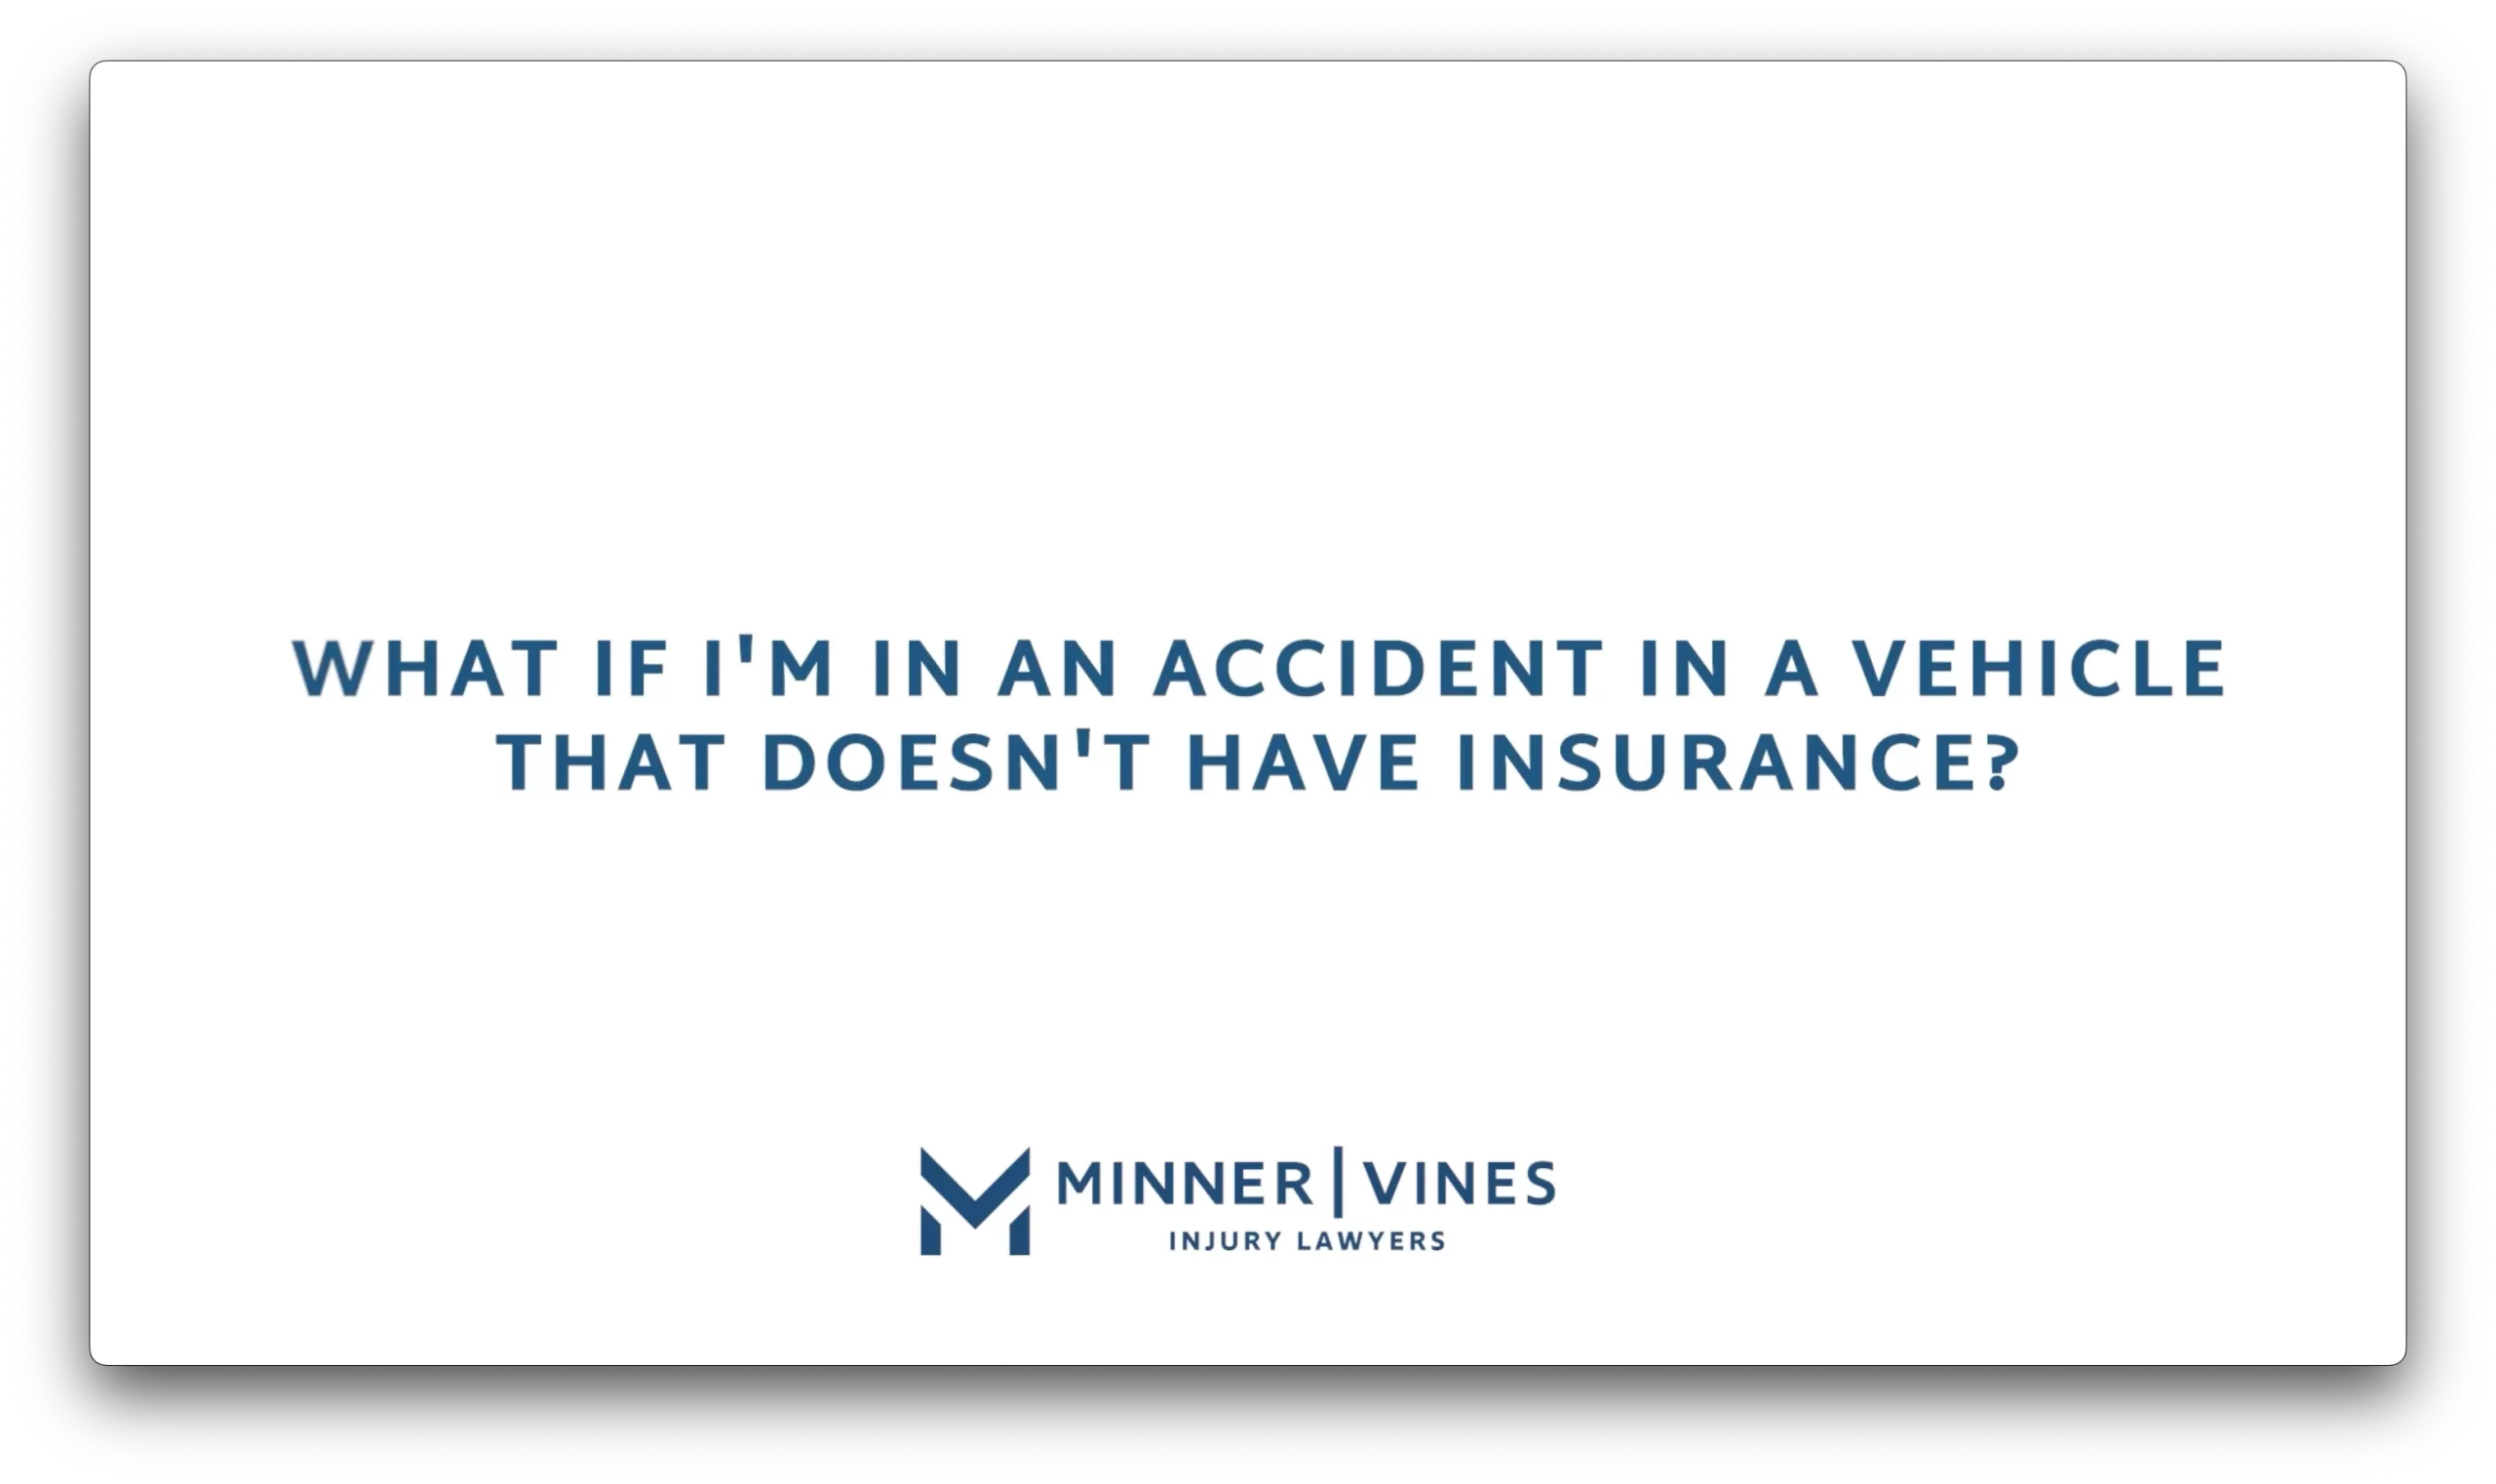 What if I’m in an accident in a vehicle that doesn’t have insurance?